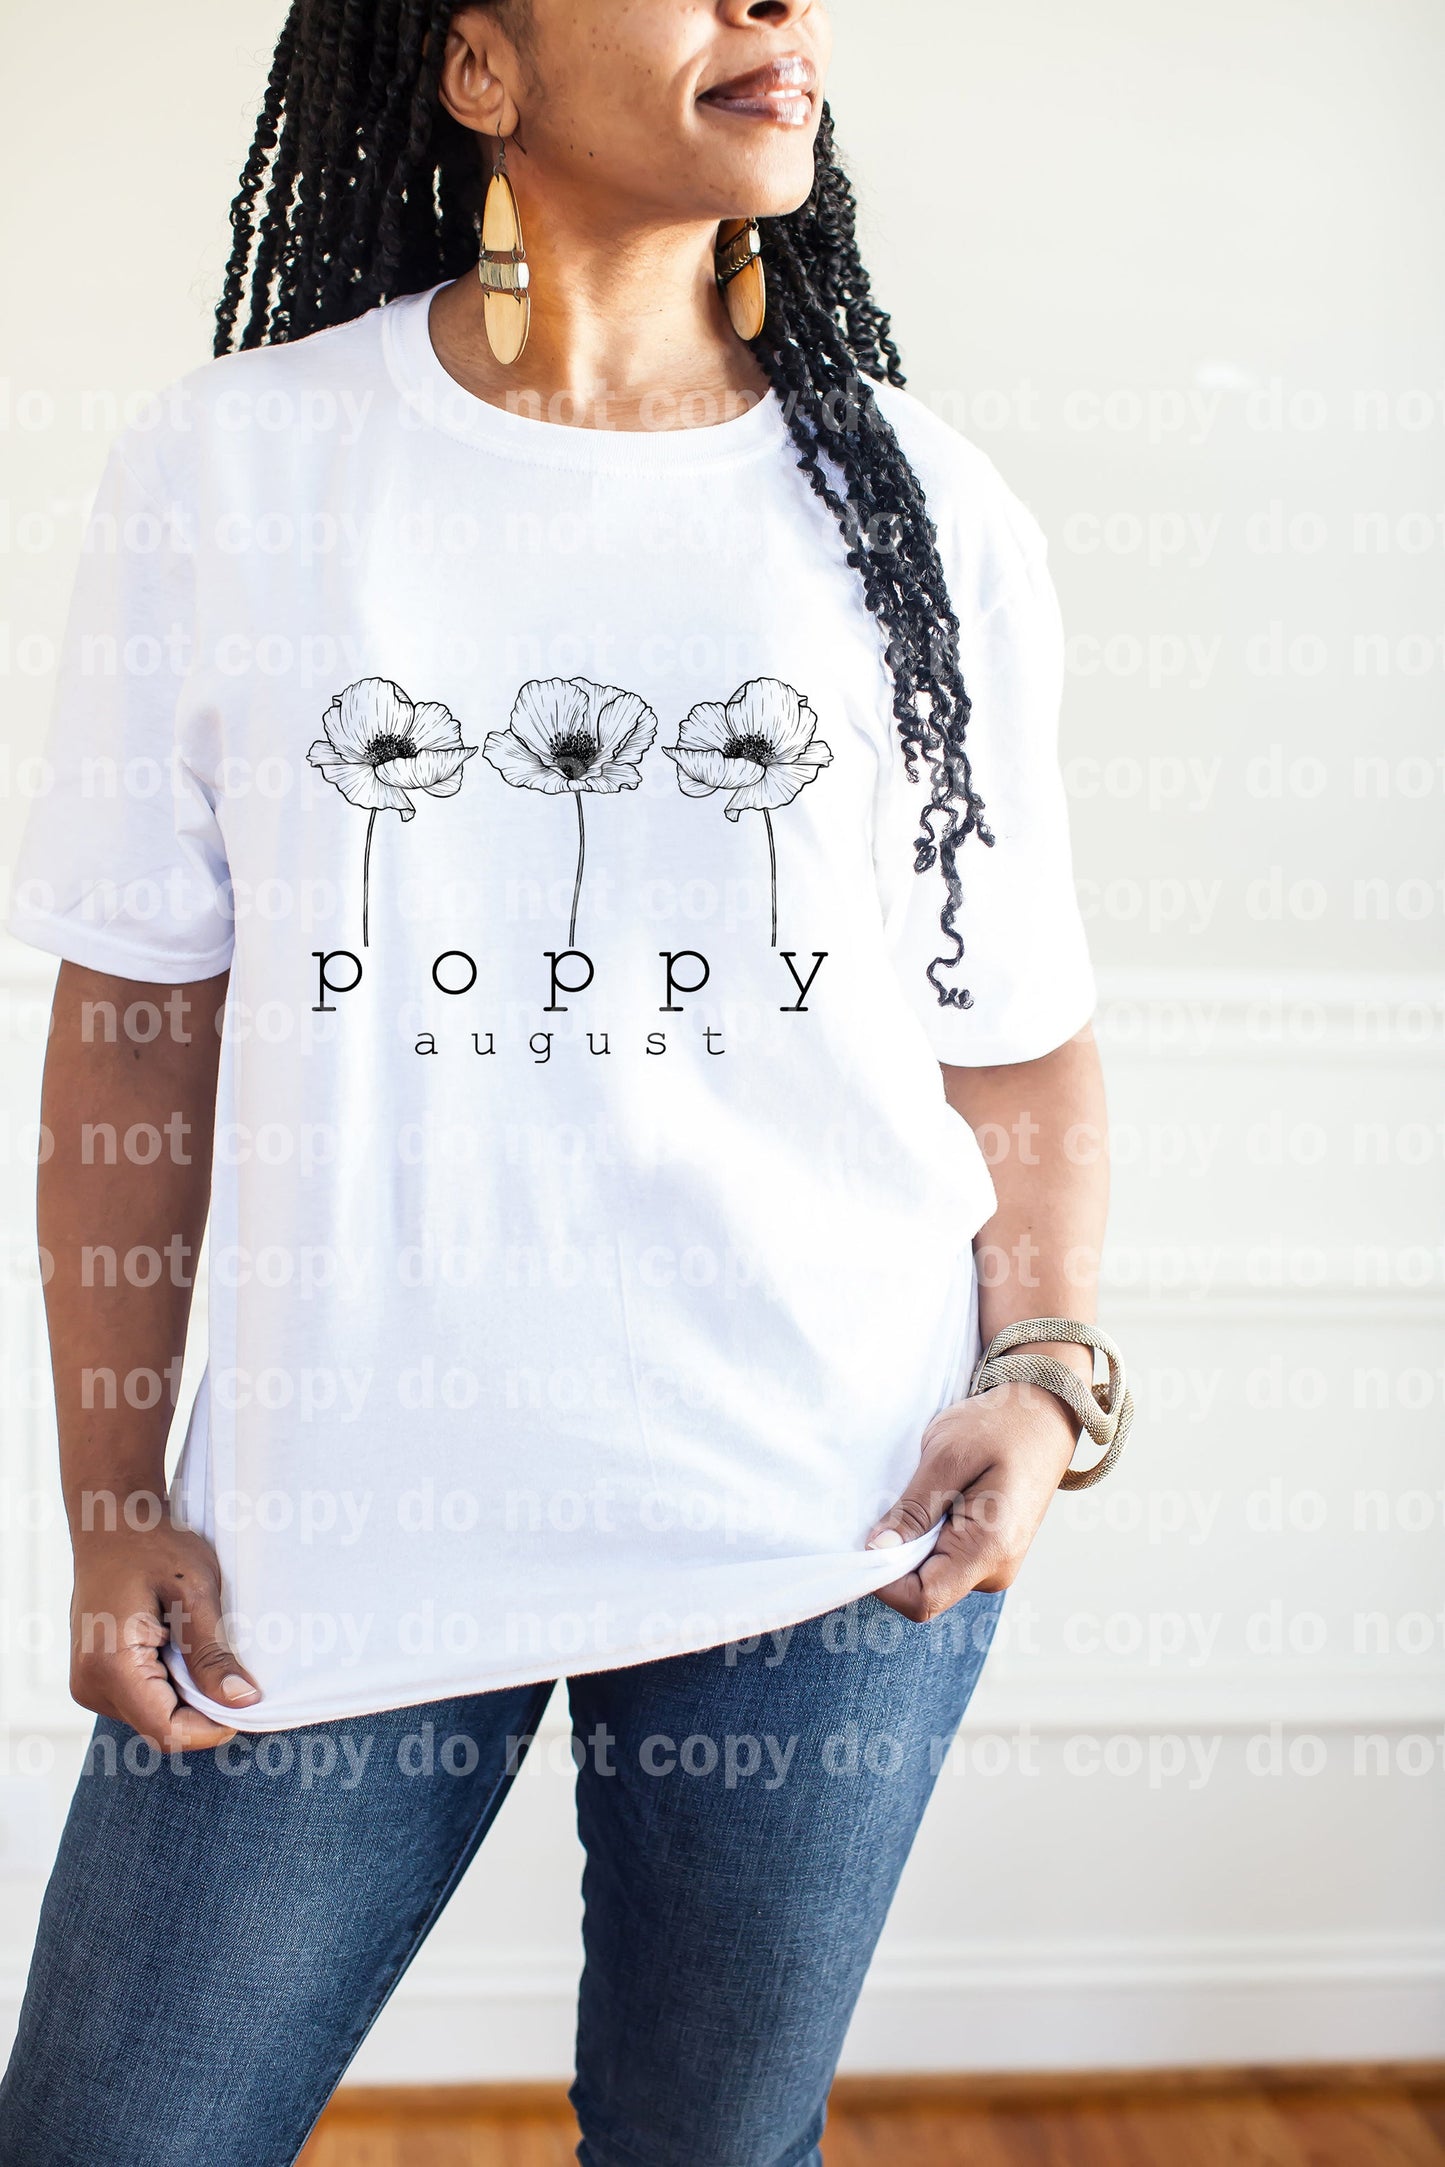 Poppy August Dream Print or Sublimation Print